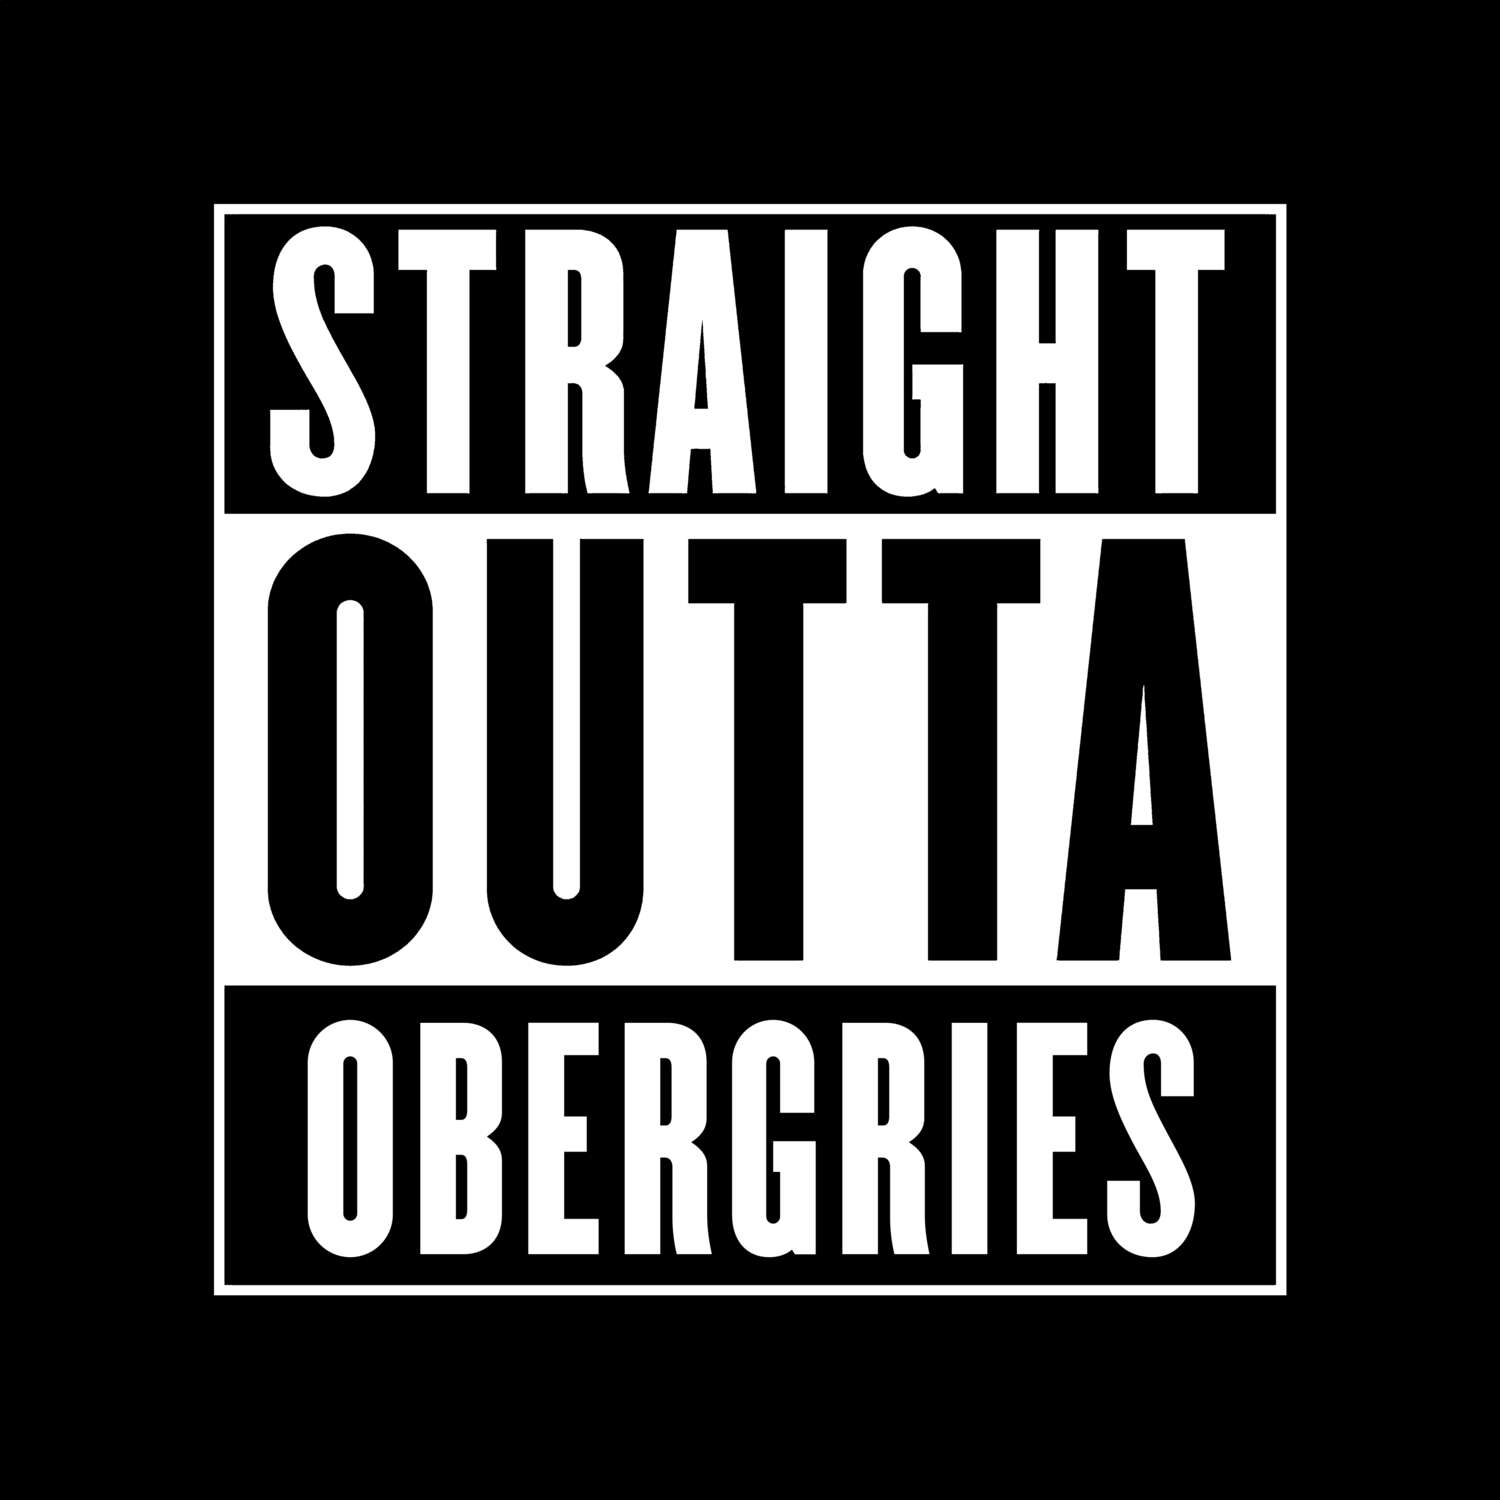 Obergries T-Shirt »Straight Outta«